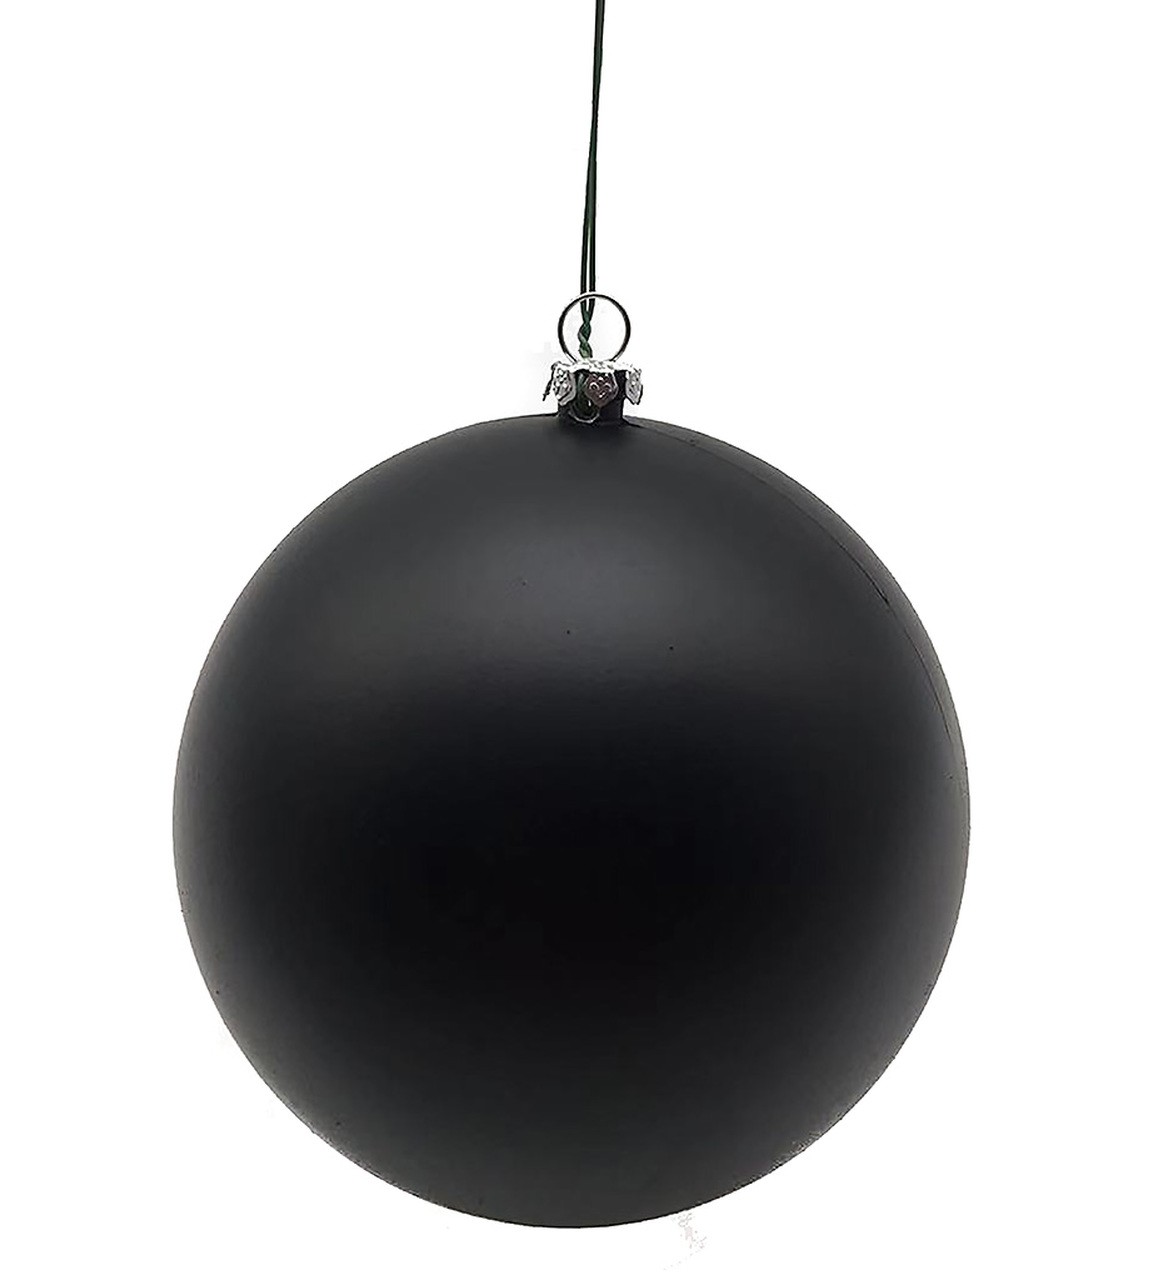 Earthflora > Christmas Tree Ornaments and Trimmings > Matte Black